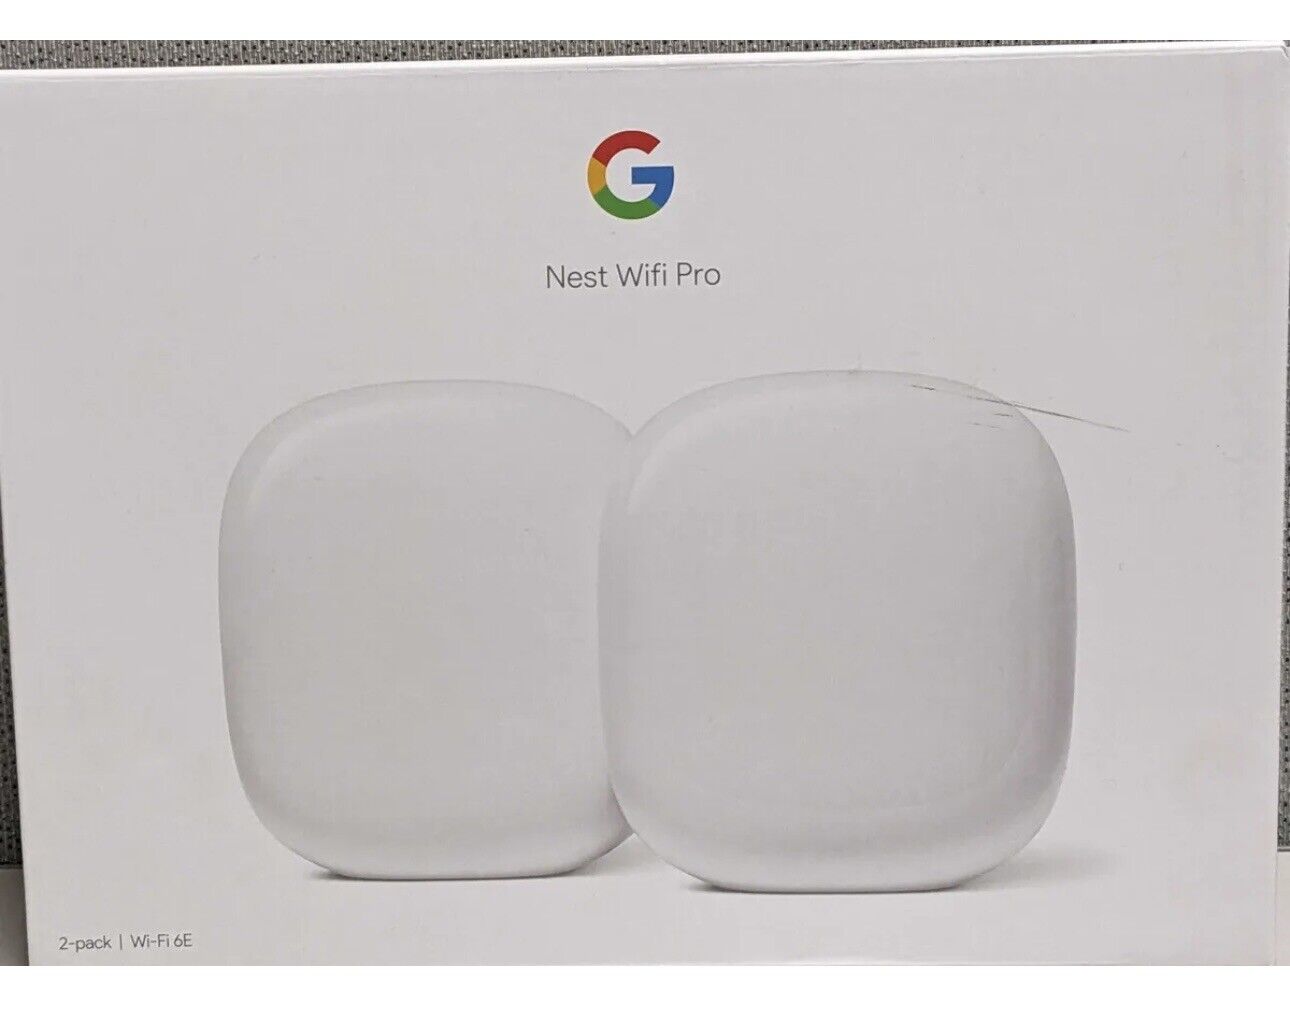 Google Nest Wifi Pro Wi-Fi 6E Router Mesh System - Snow (2-Pack) New